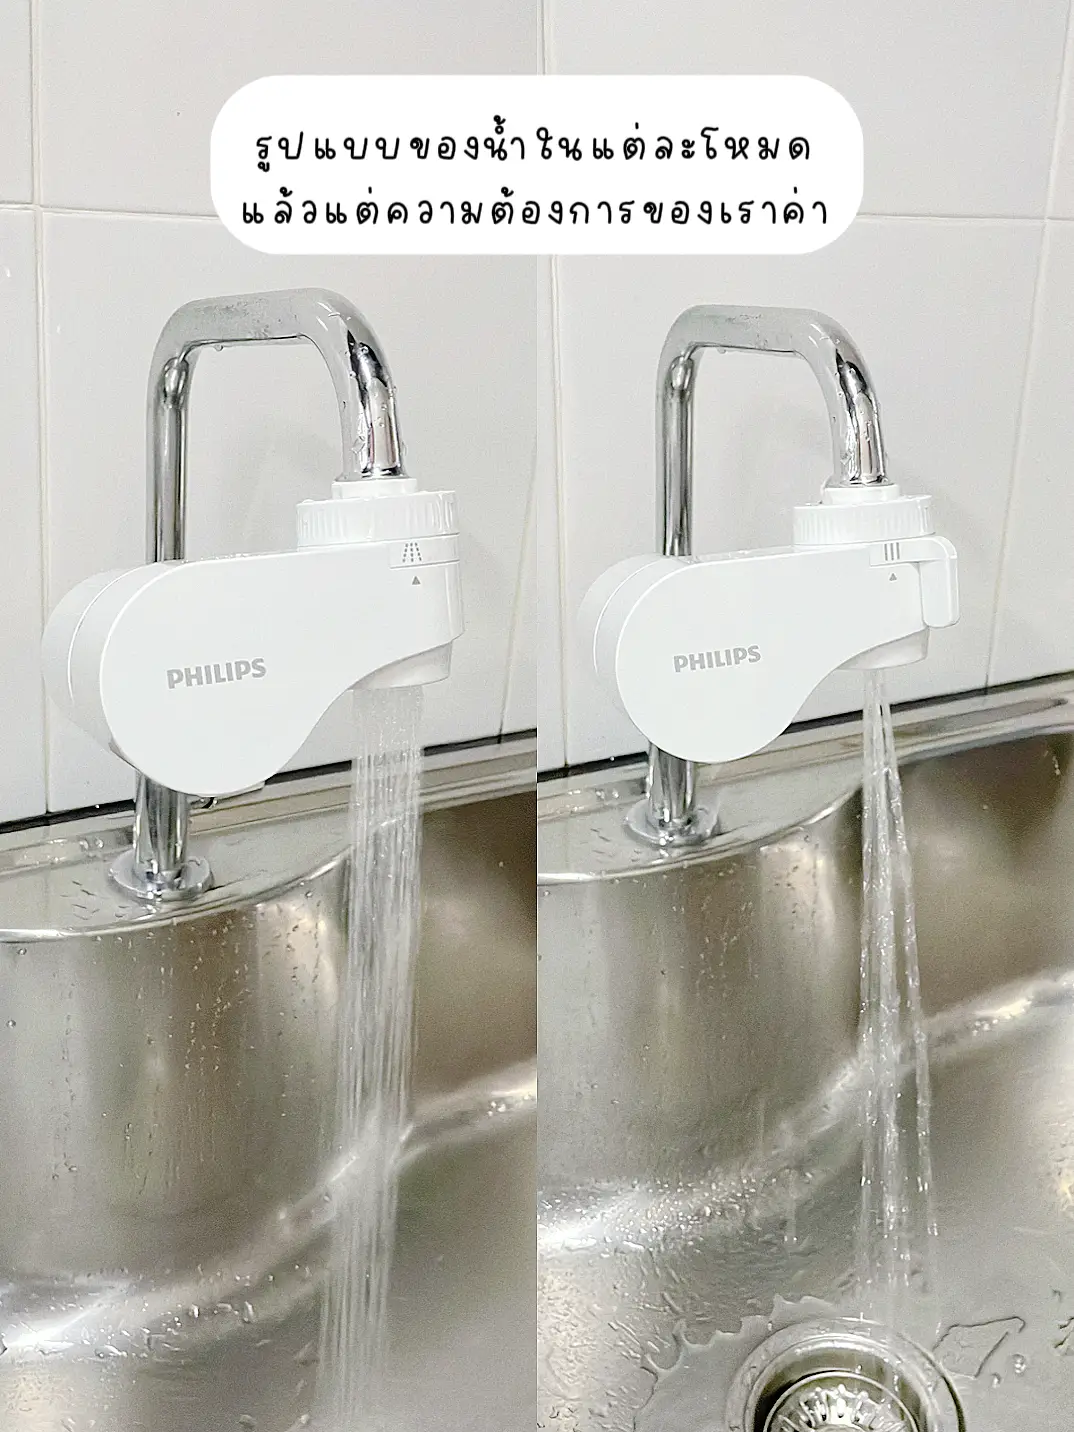 Philips Water Filter Faucet Head -: 🛁 i-tem That Every Home Should Have 🚿, Gallery posted by earn ♡